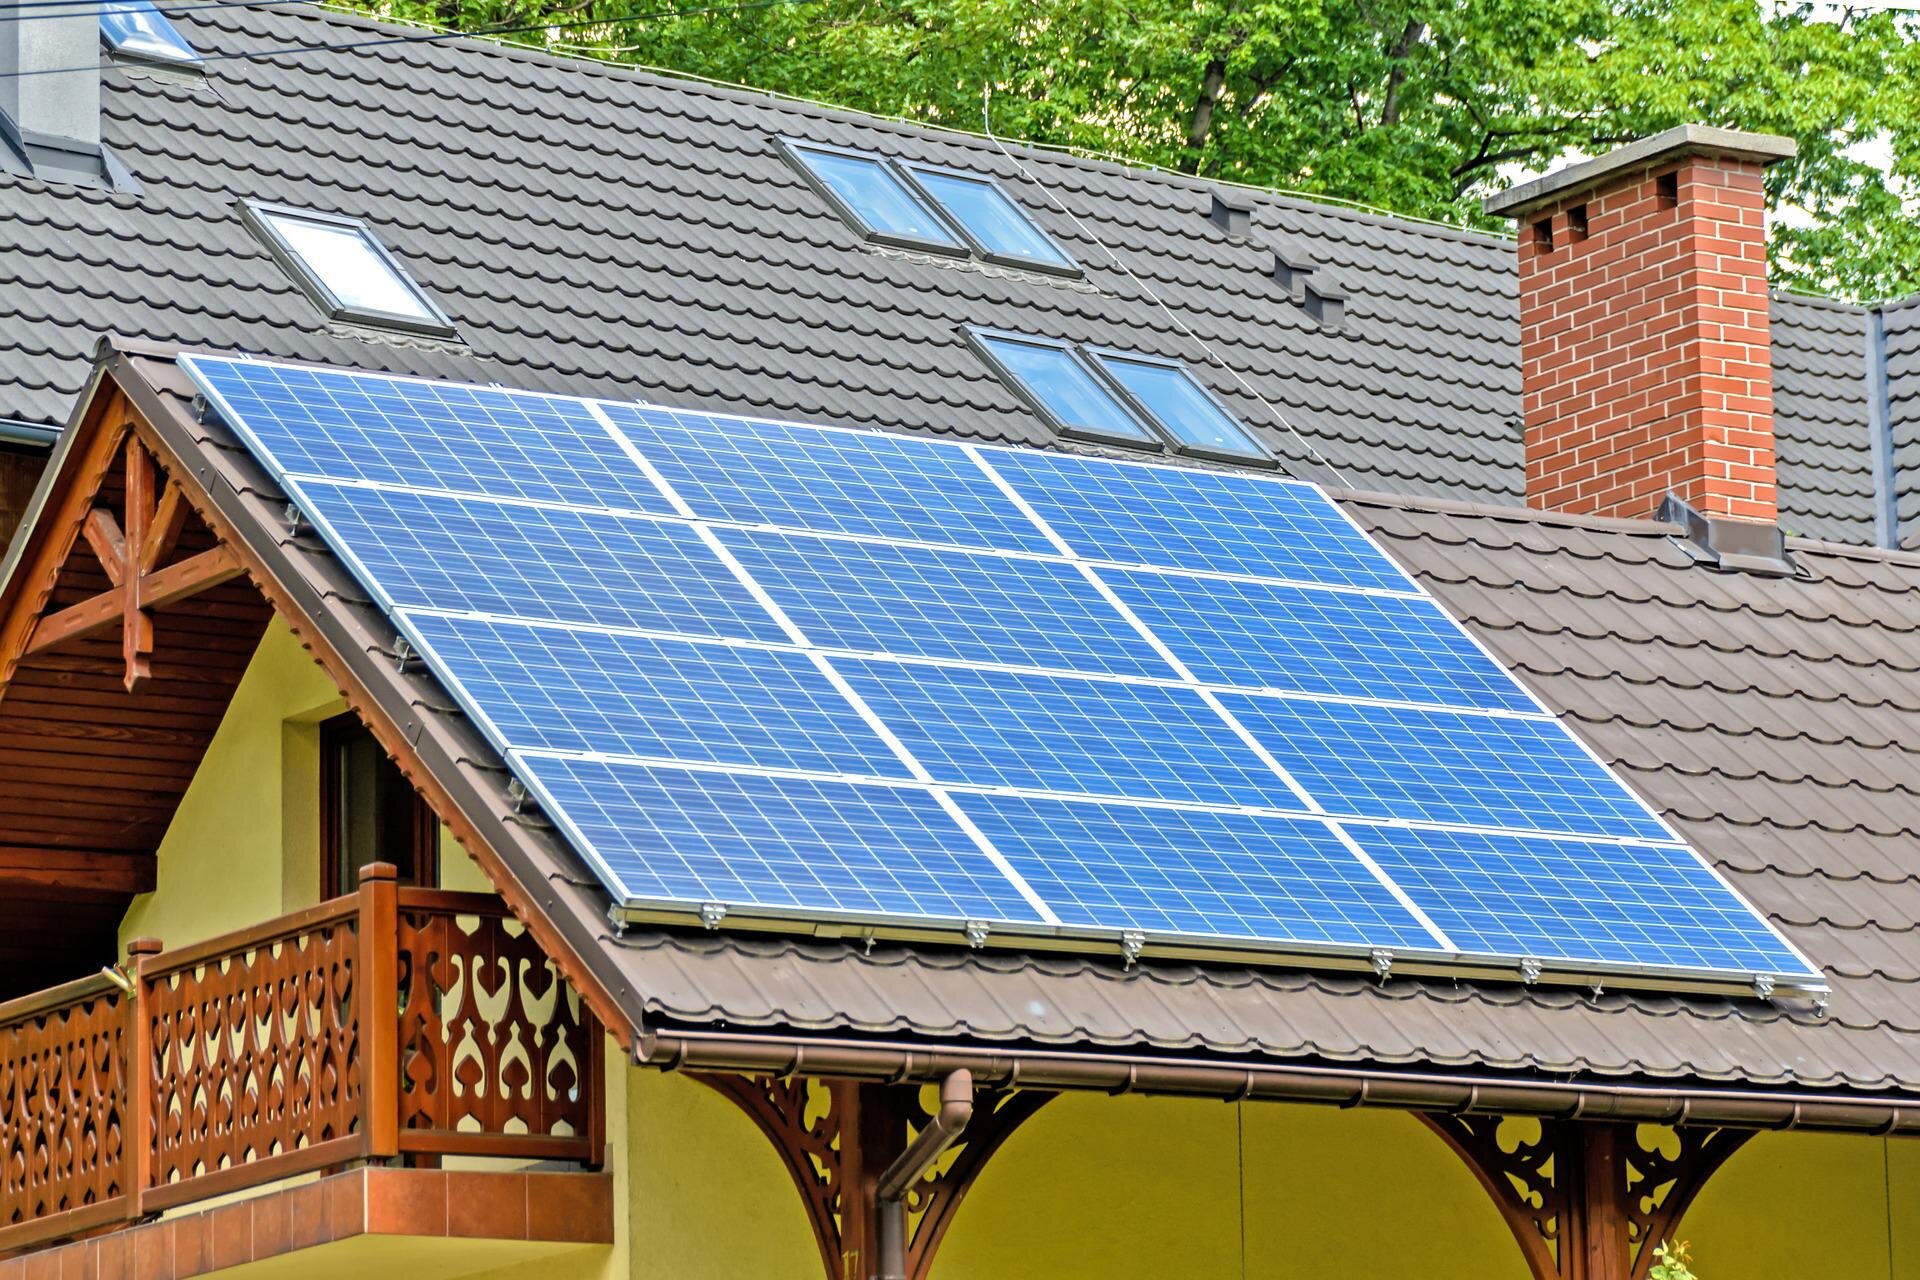 Study finds local voluntary programs are effective in promoting green energy